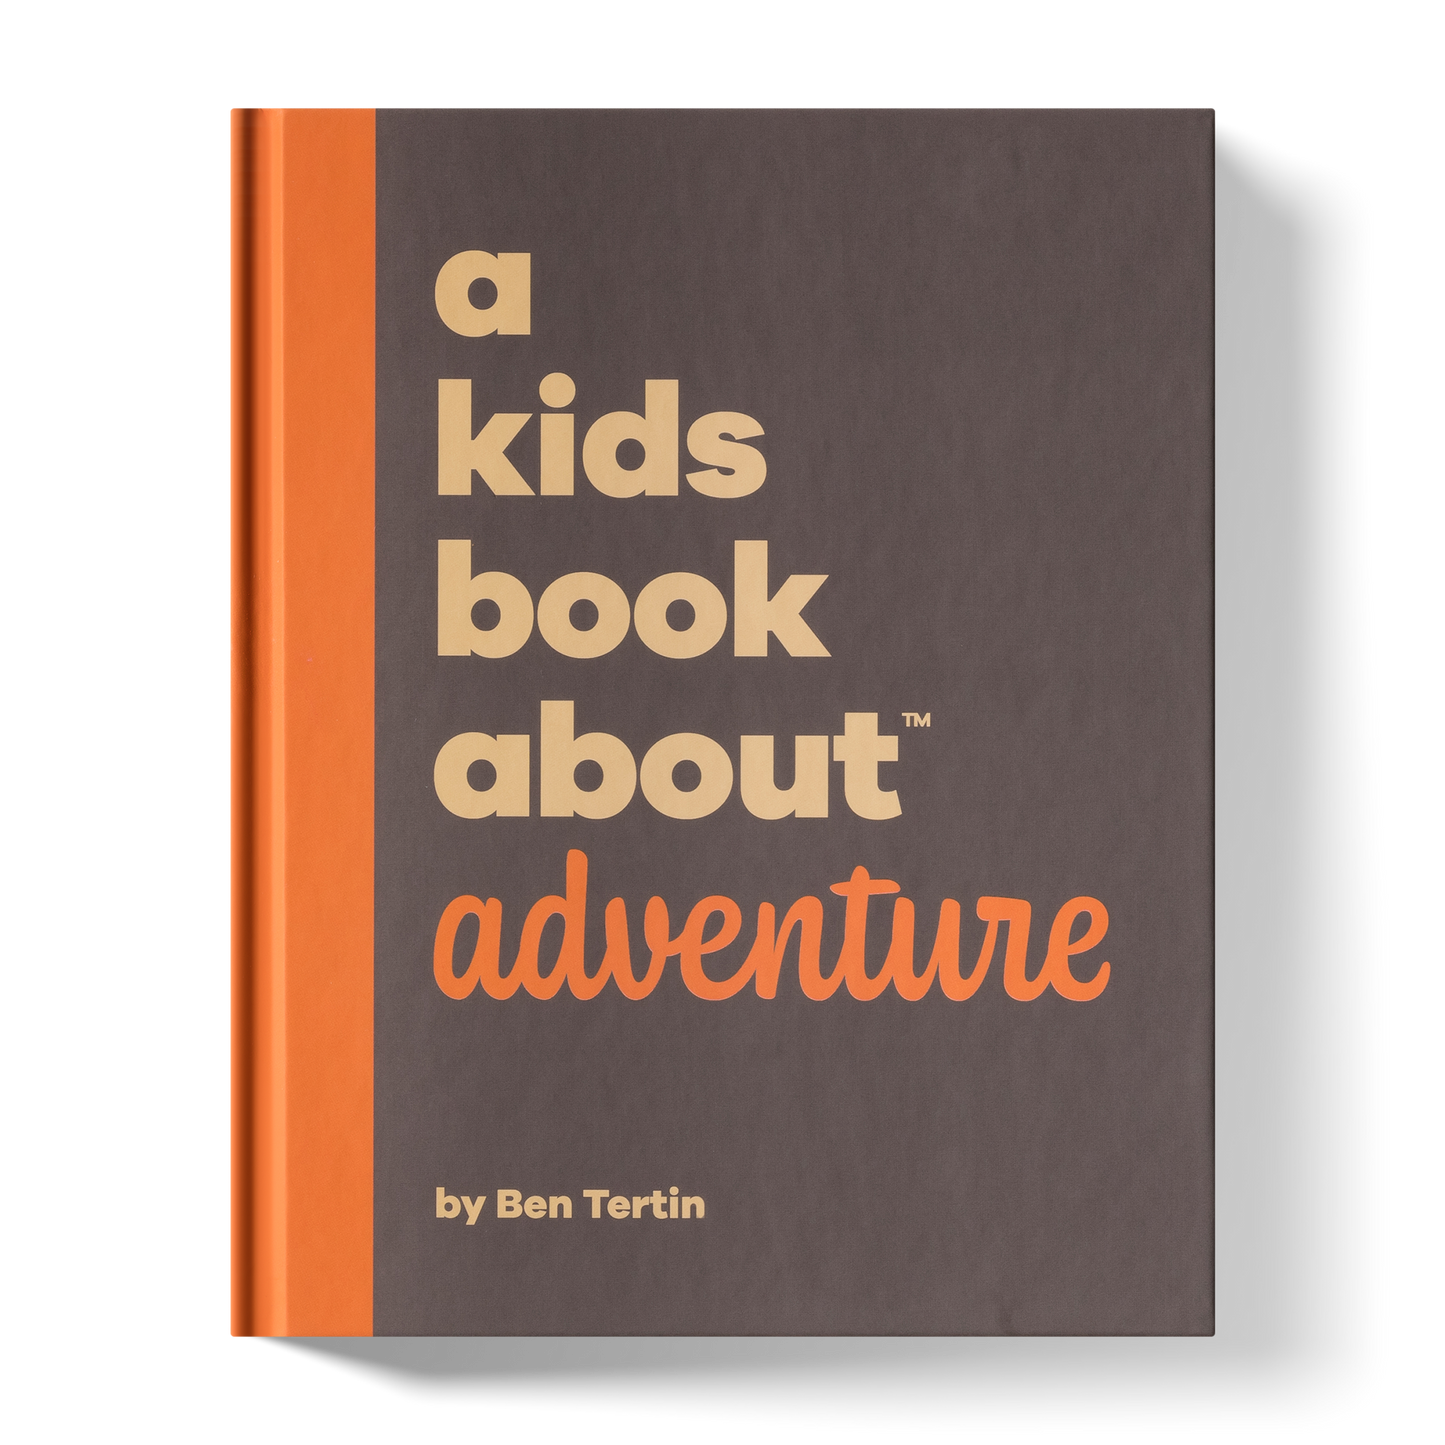 Cover photo for “A Kids Book About Adventure”